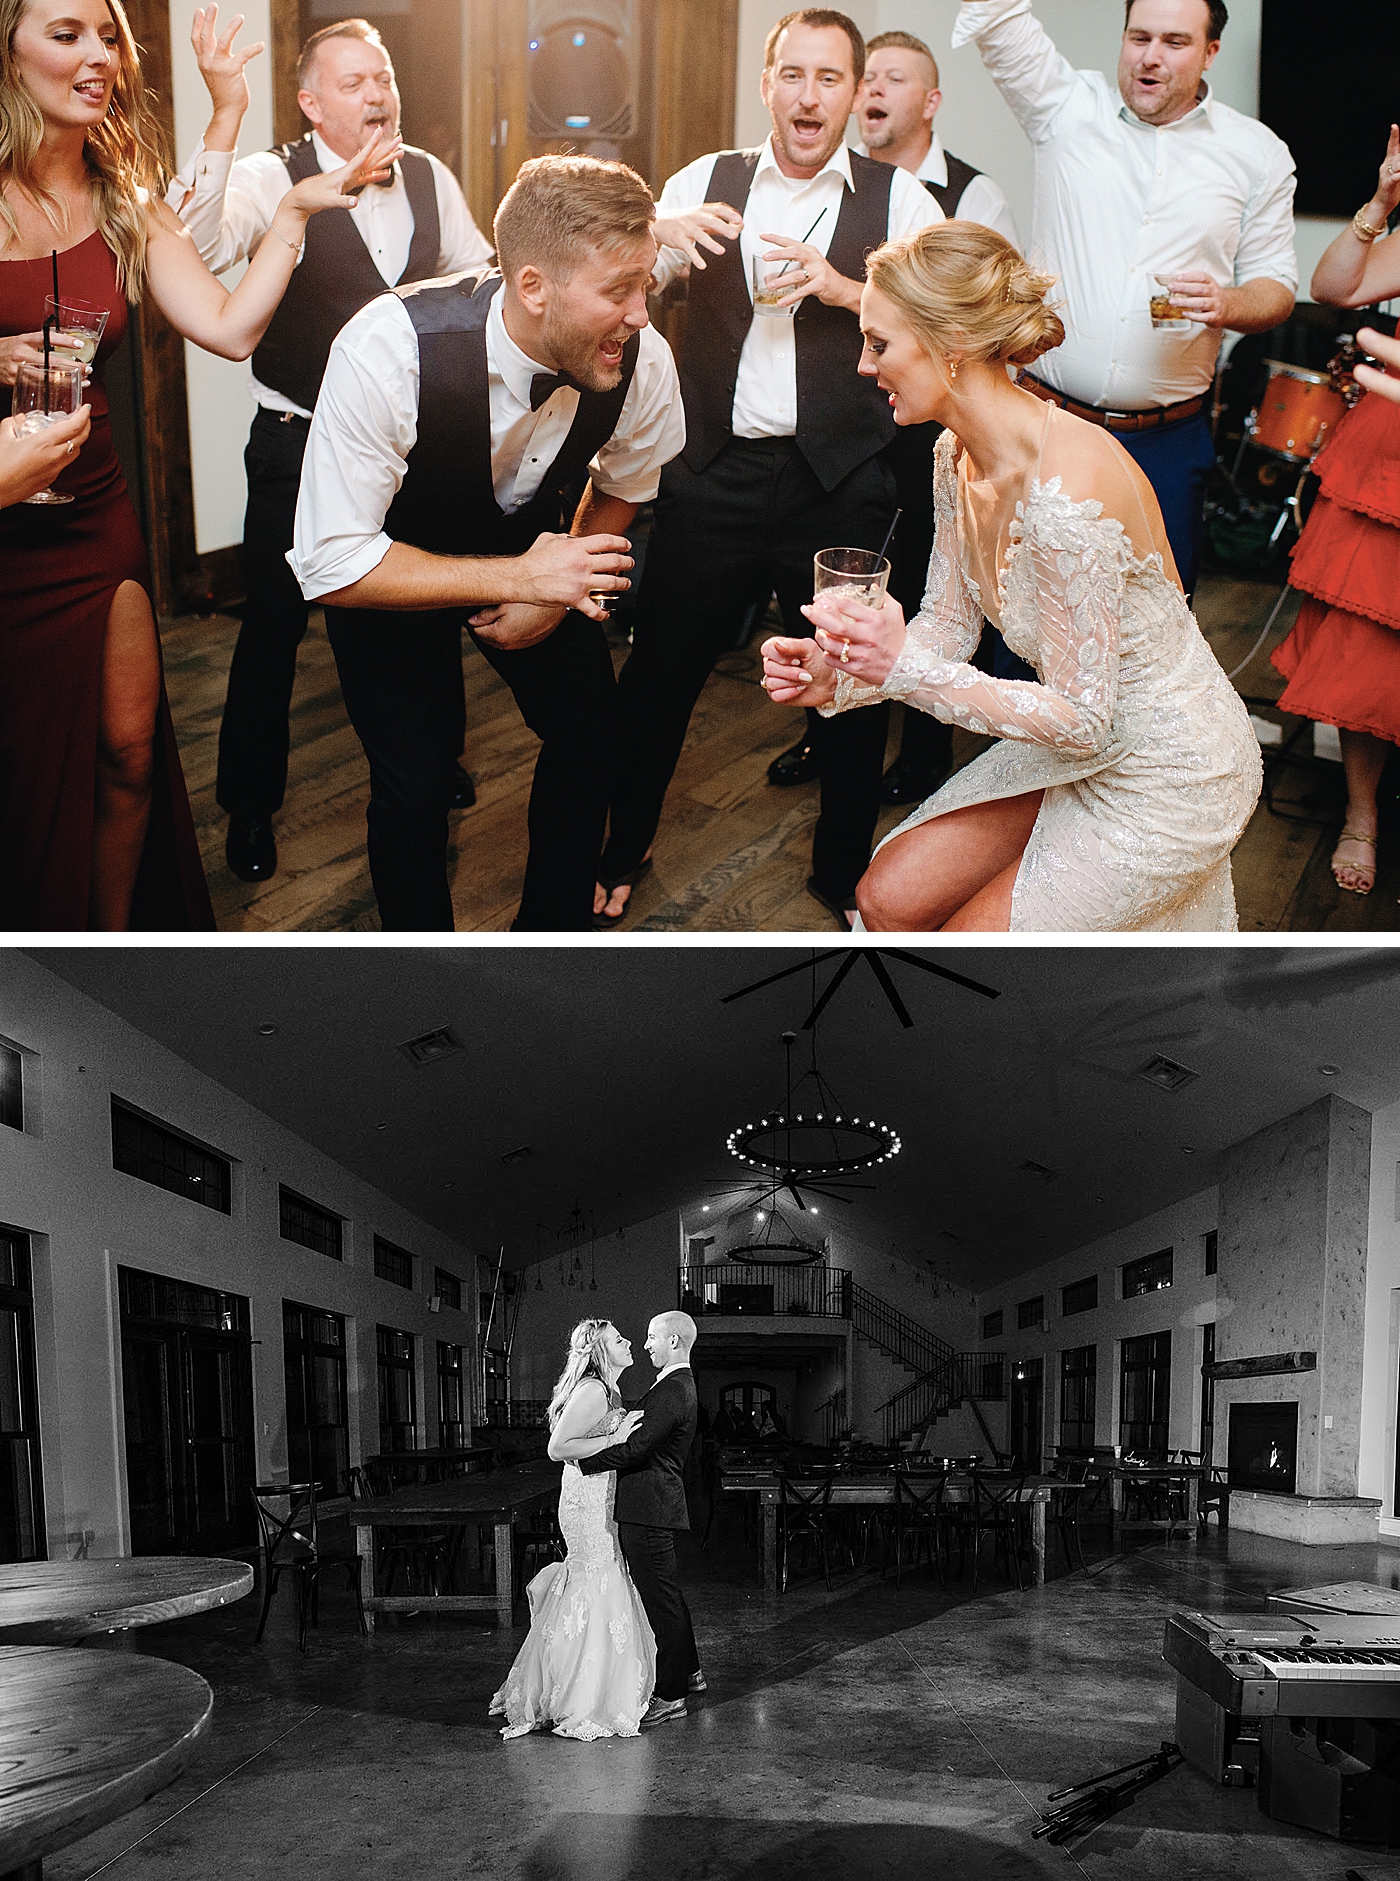 Bride and groom dancing at wedding reception with wedding guests | bride and groom having private last dance | McArthur Weddings and Events